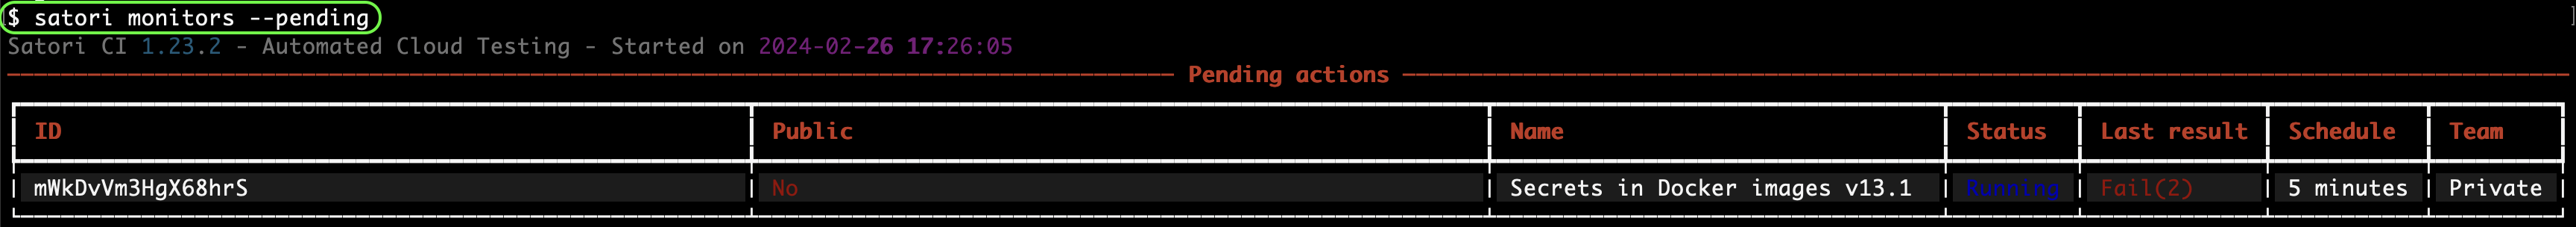 Pending Actions on Monitor